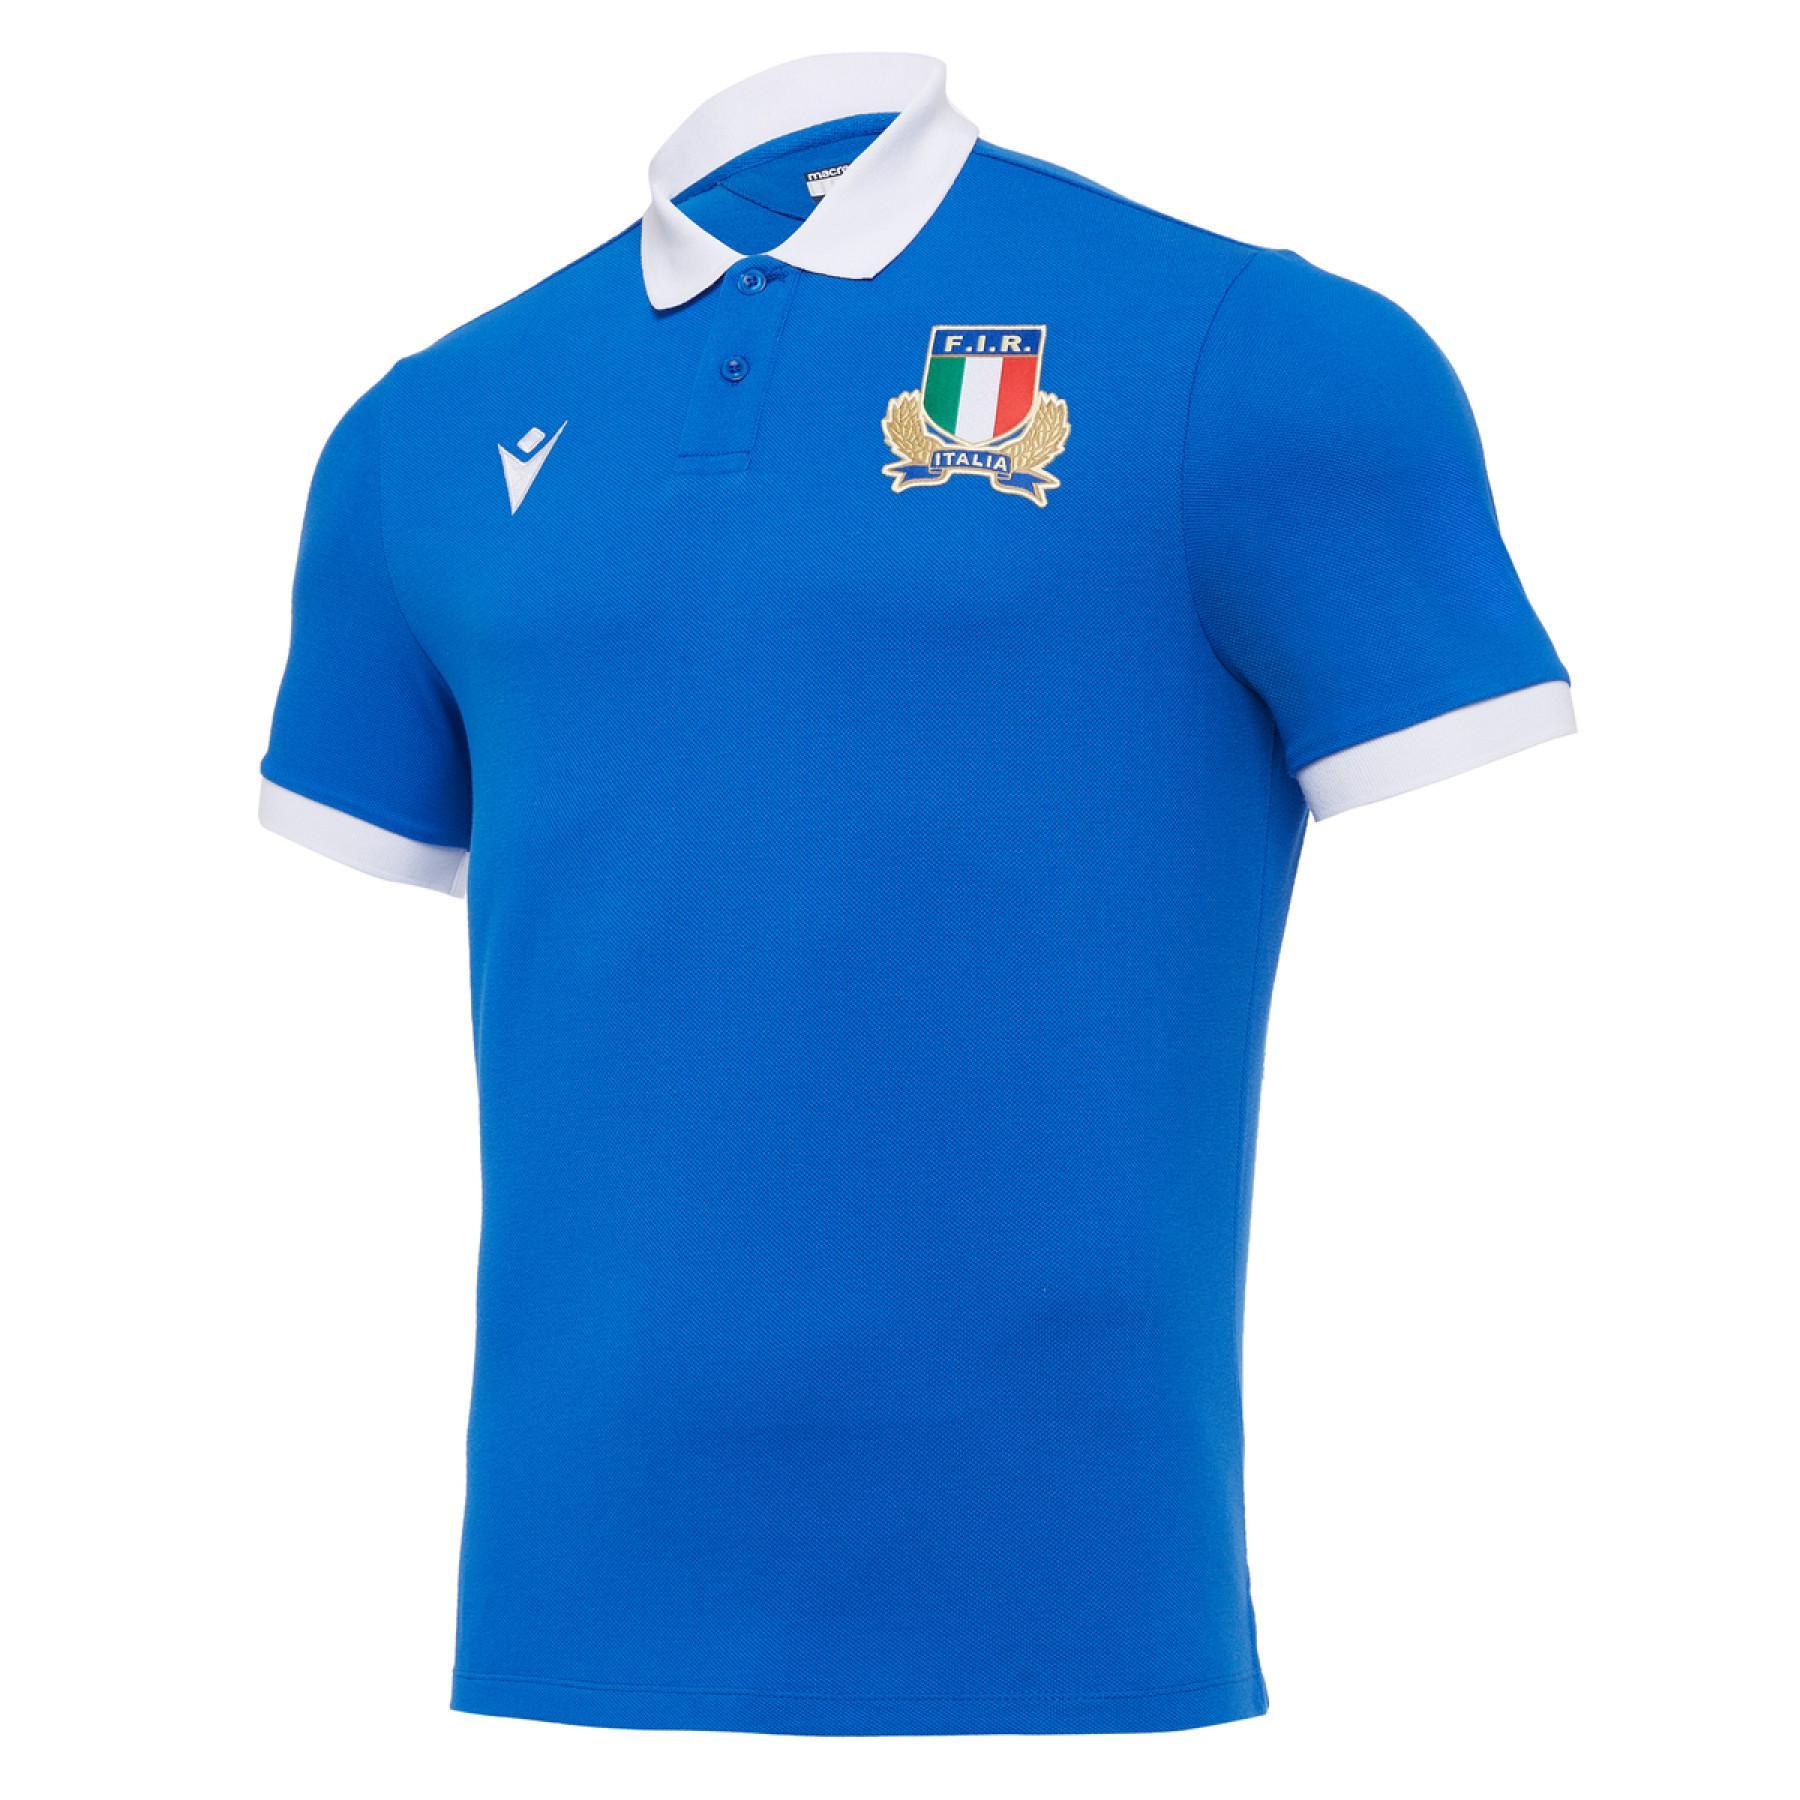 Bomullsjersey Italie rugby 2020/21